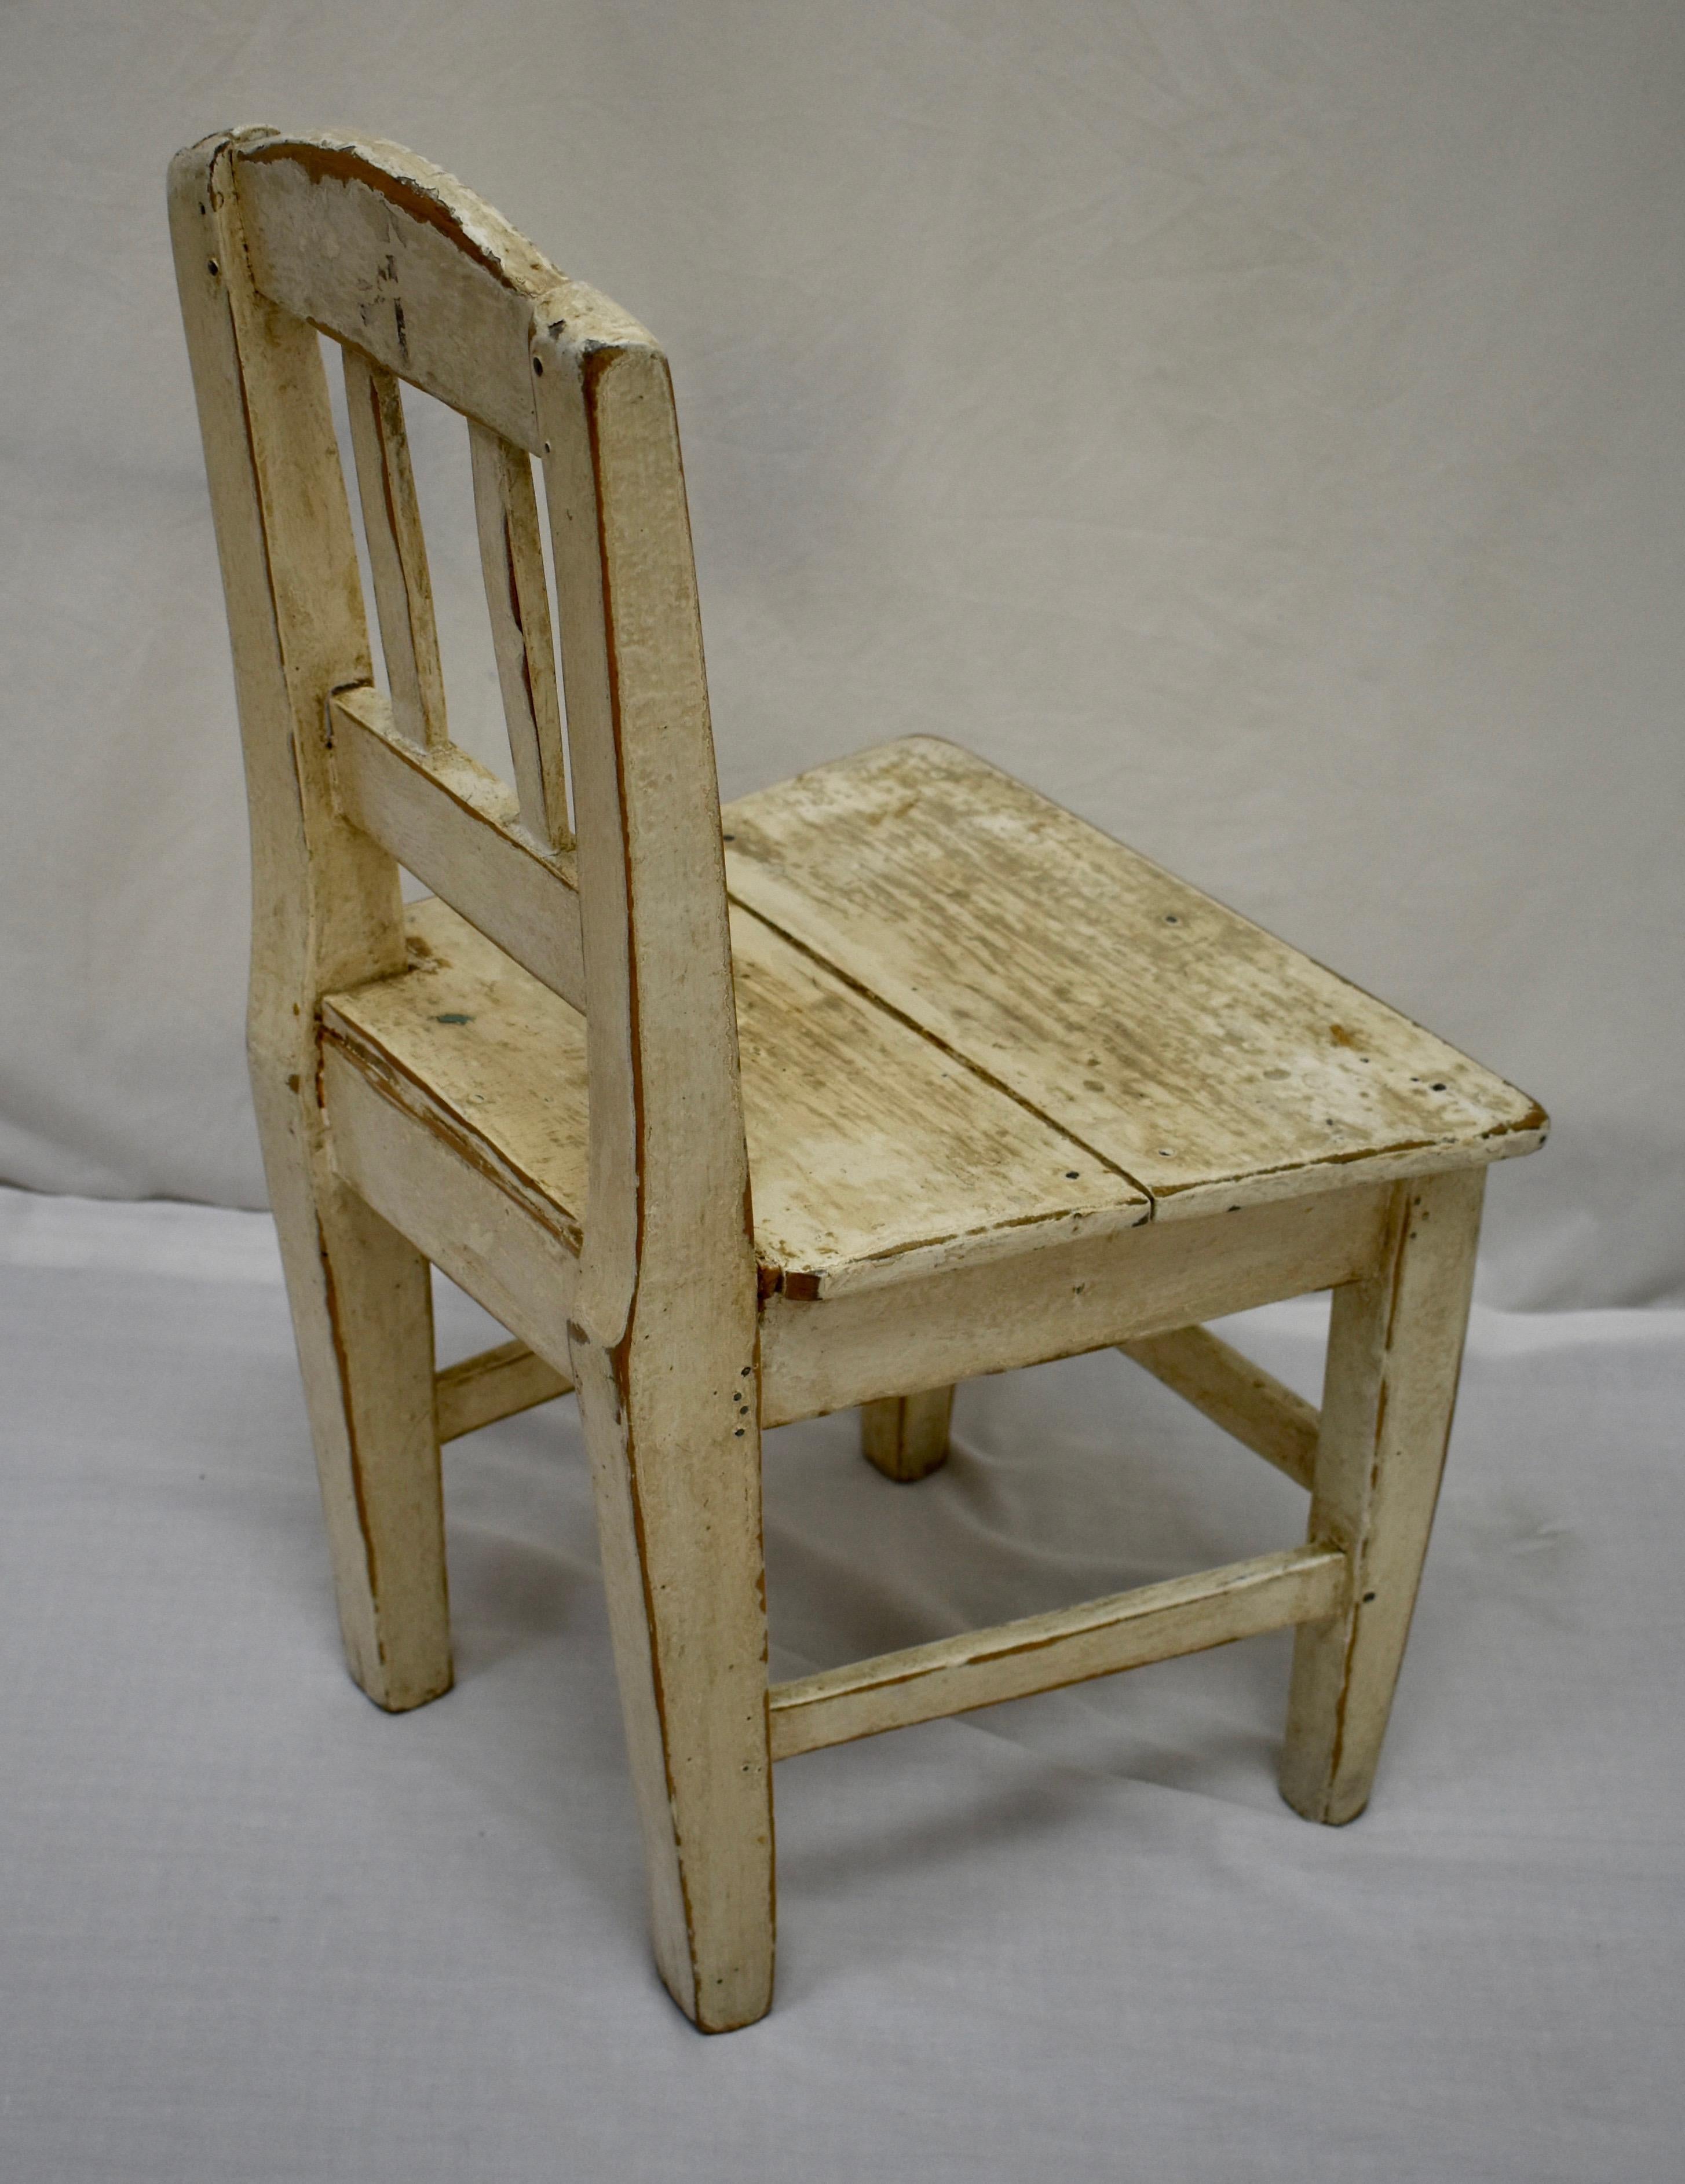 20th Century Painted Oak Plank-Seat Child's Chair